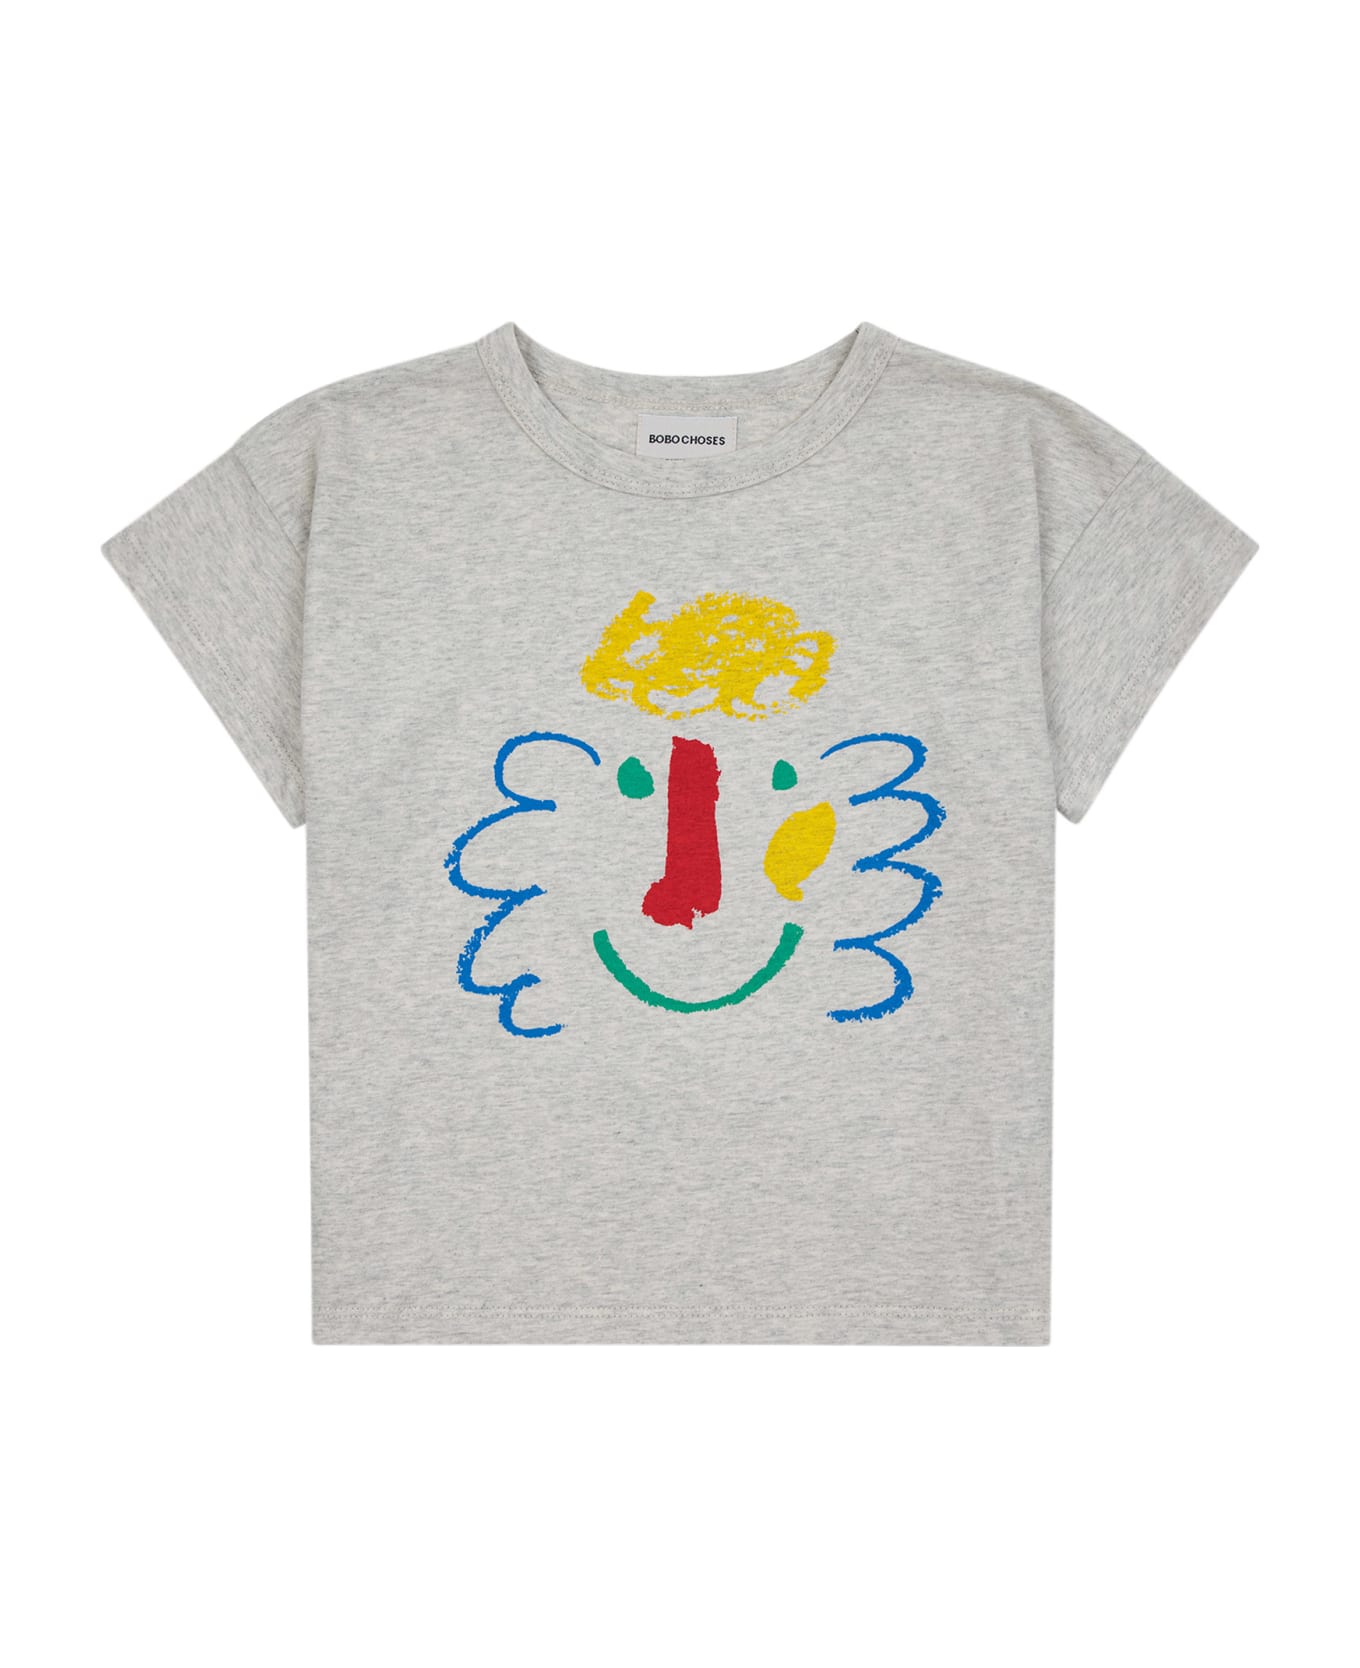 Bobo Choses Gray T-shirt For Kids With Multicolor Print - Grey